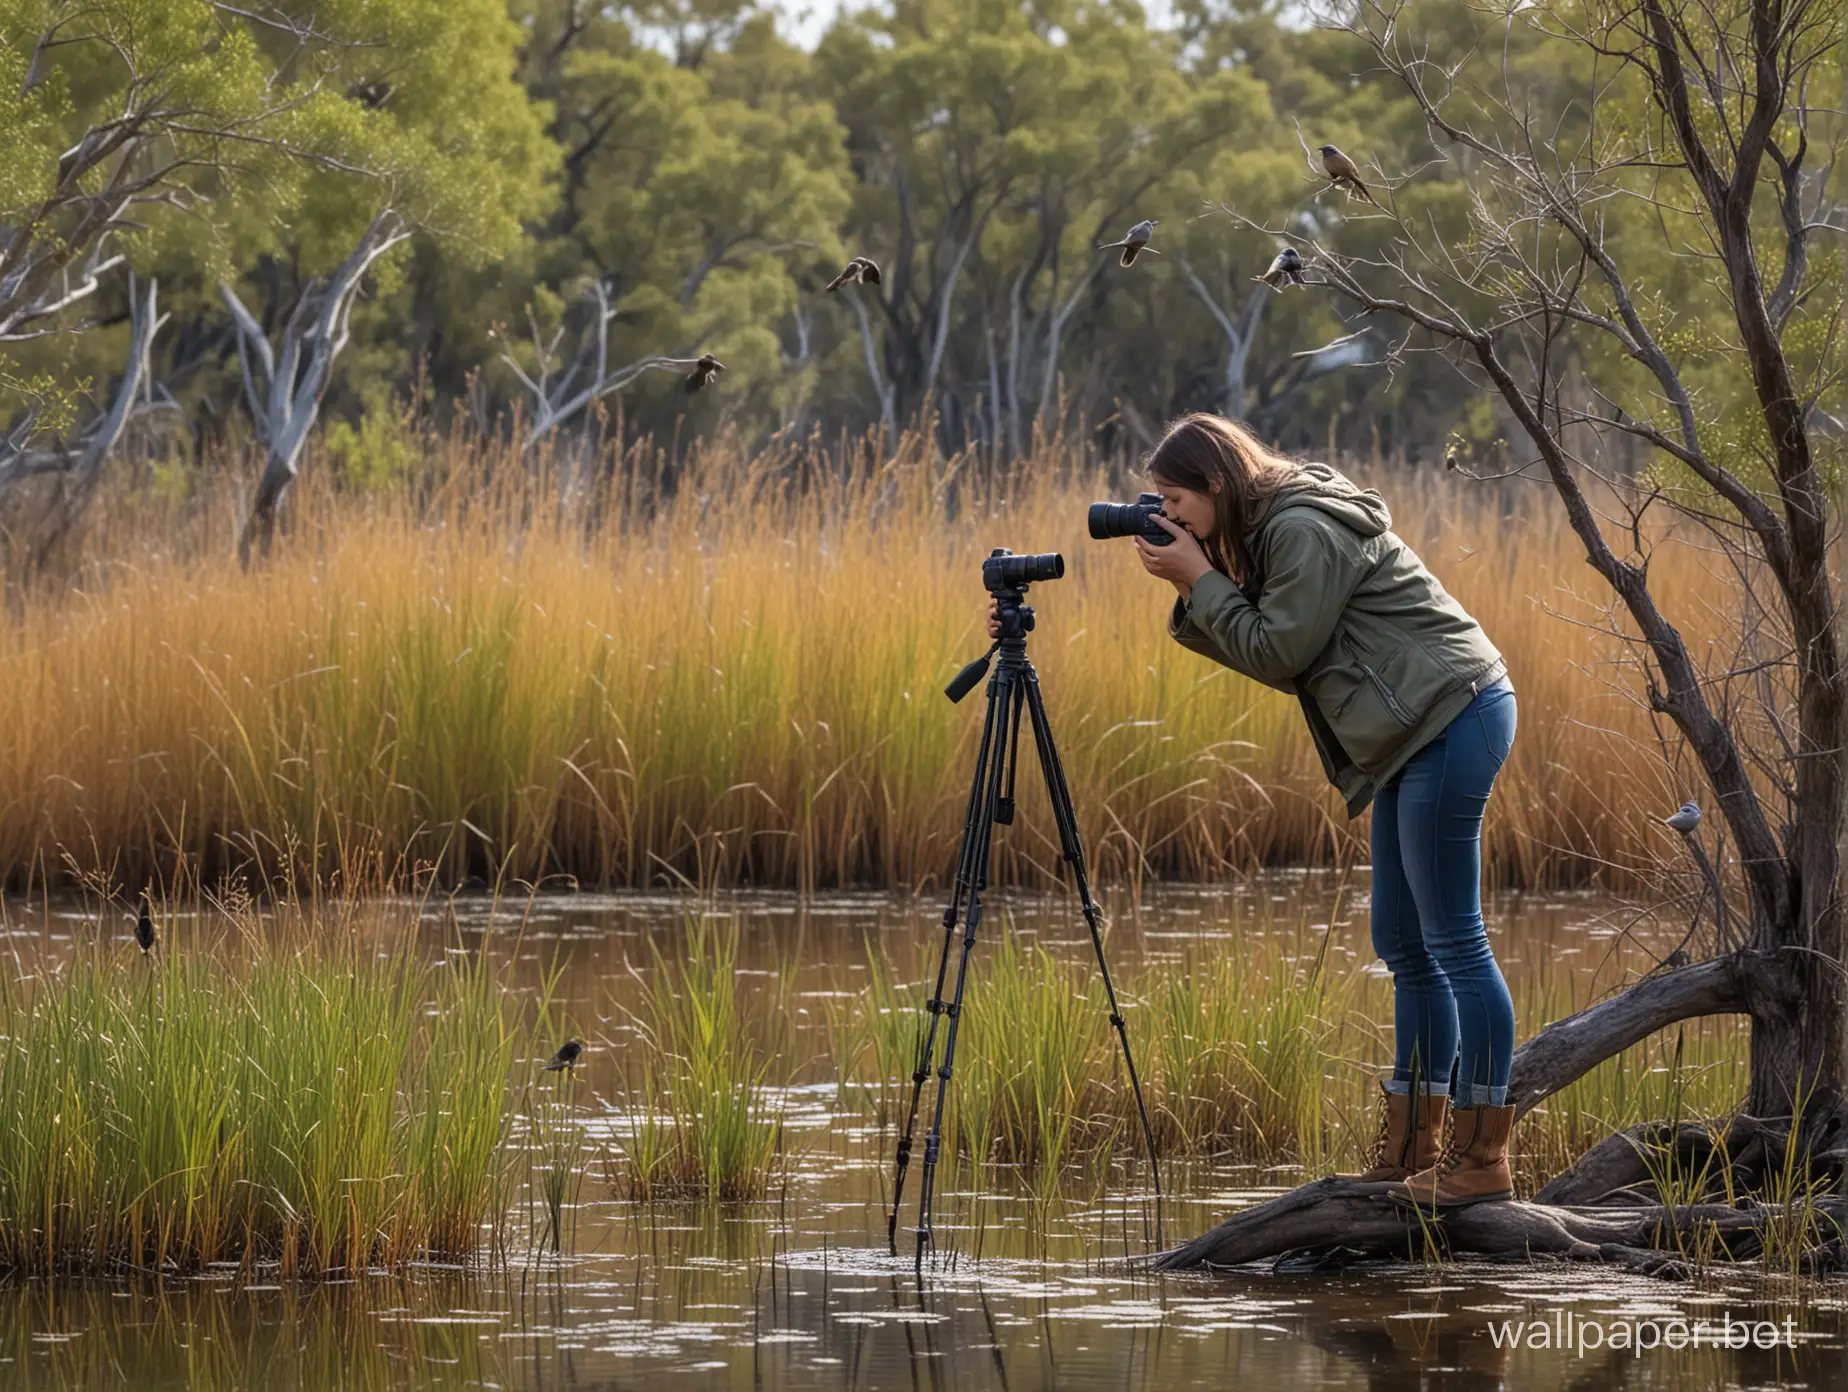 Girl photographer photographing bird life in the wetlands. full body view, native trees, bushes, birds, detailed features, sharp image.